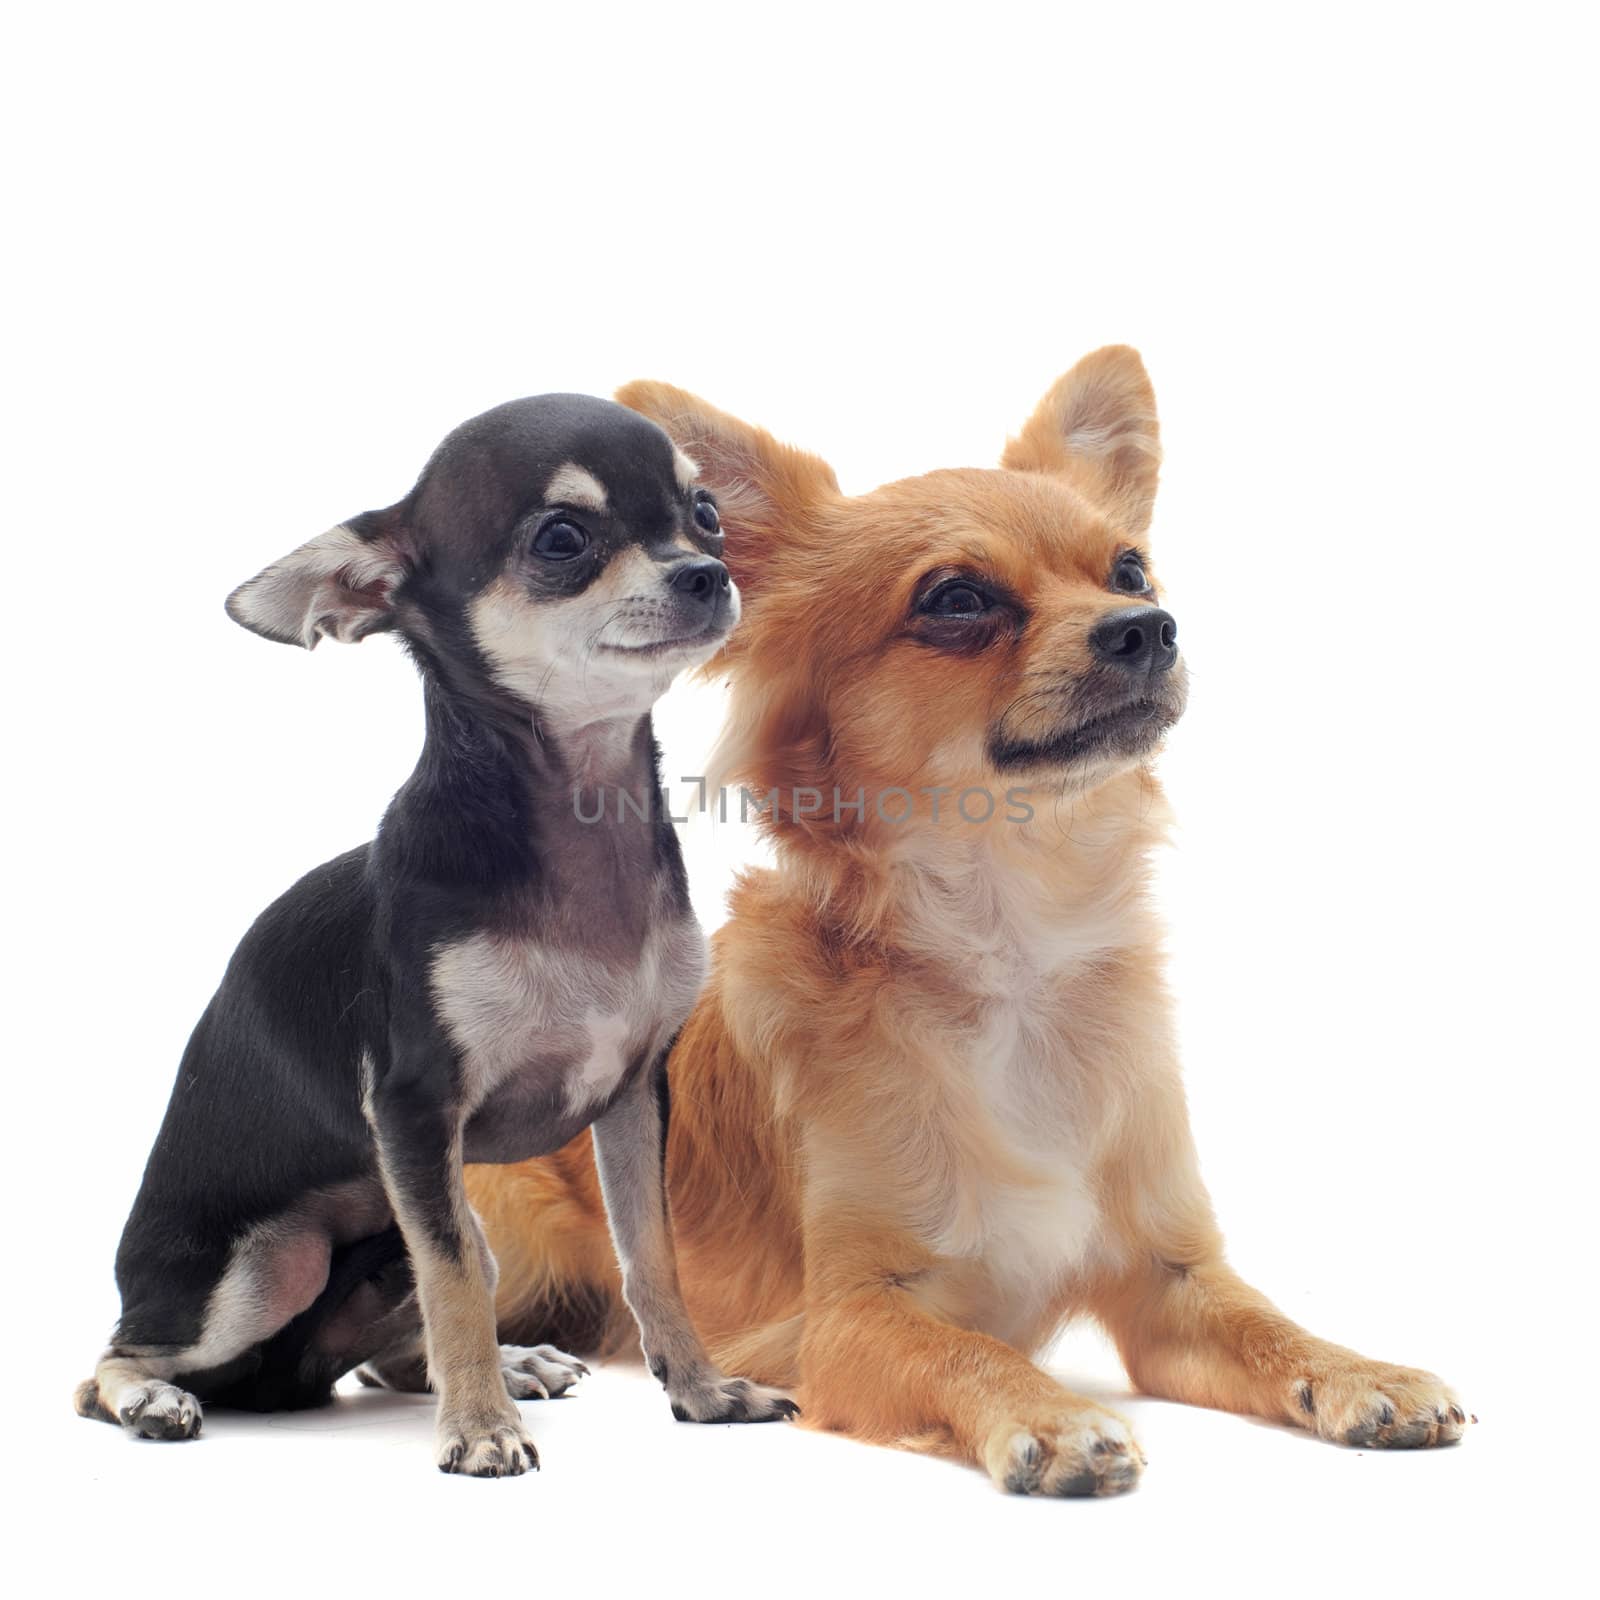 puppy and adult chihuahuas by cynoclub